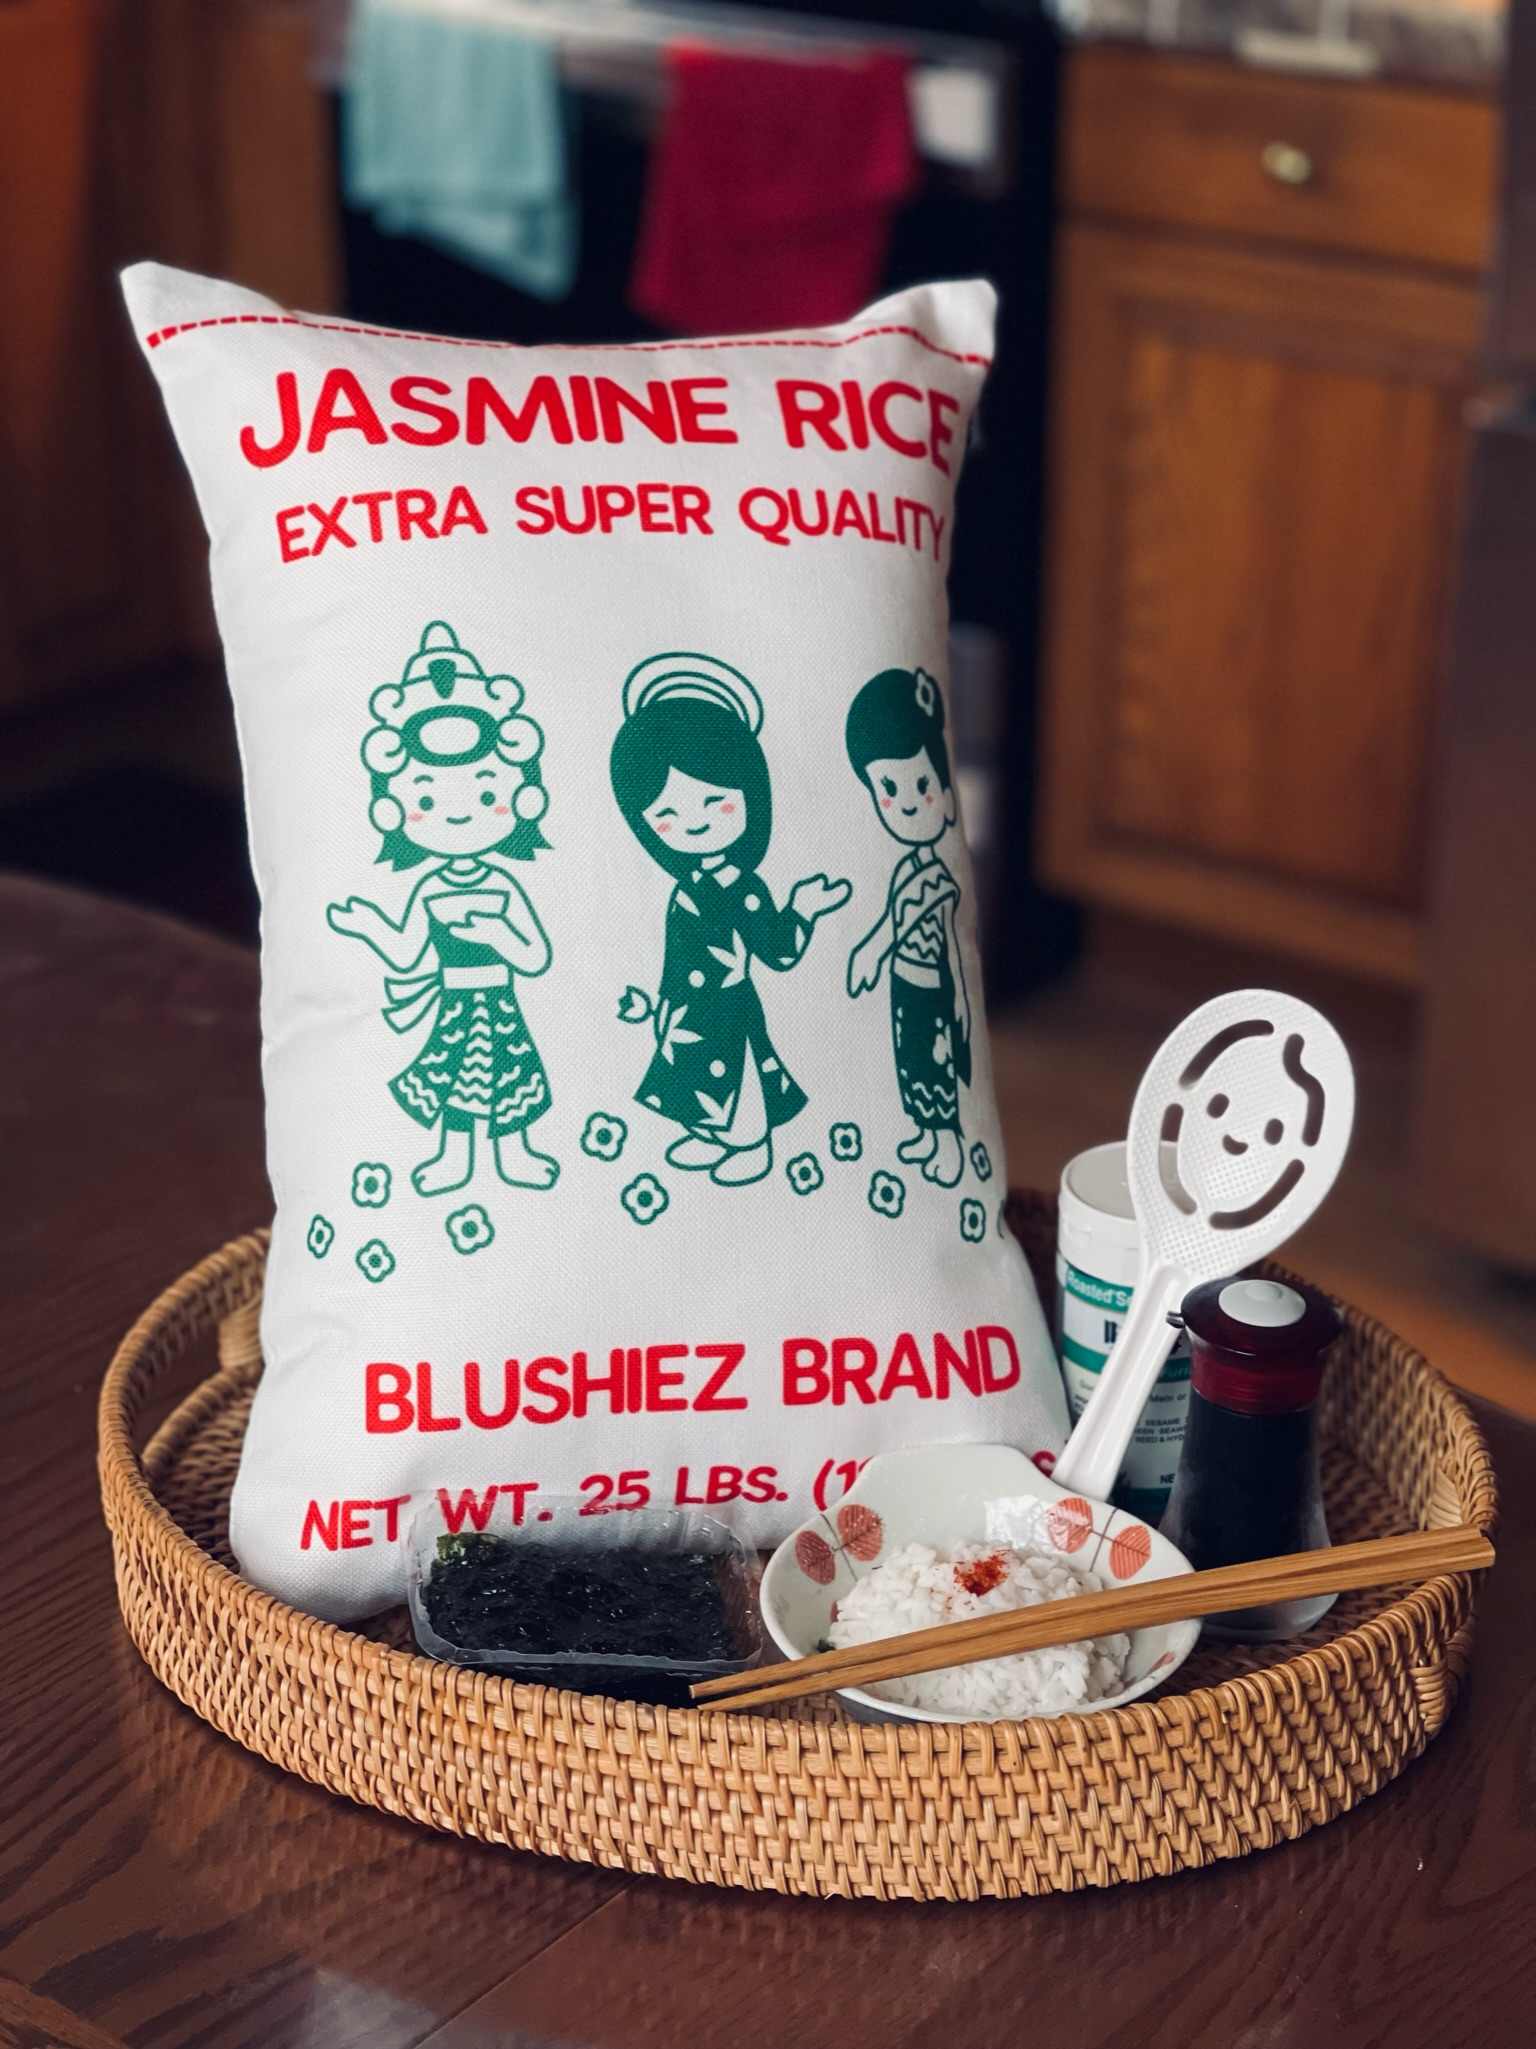 Front of the pillow, resembling Jasmine Rice packaging, placed in a tray alongside a bowl of rice, soy sauce, and seaweed in a kitchen. The pillow features a kawaii-style illustration of three girls in green dresses on a white background, reminiscent of the vibrant imagery found on Jasmine Rice packaging. The scene depicts a cozy kitchen setting with elements representing a delightful meal.